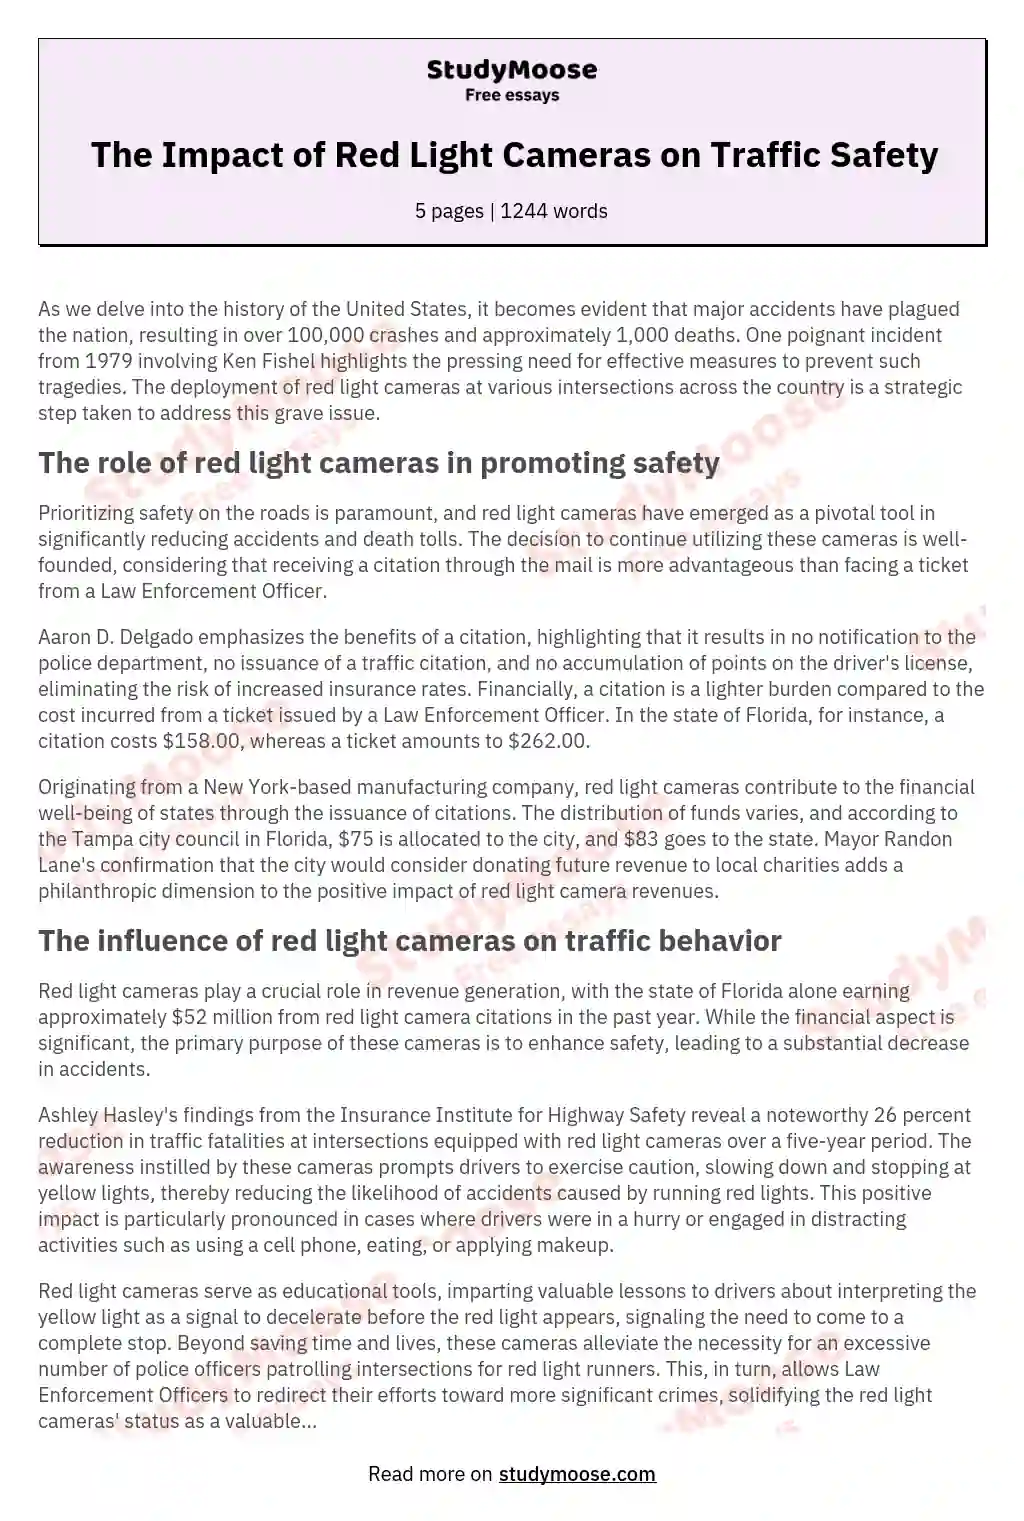 The Impact of Red Light Cameras on Traffic Safety essay